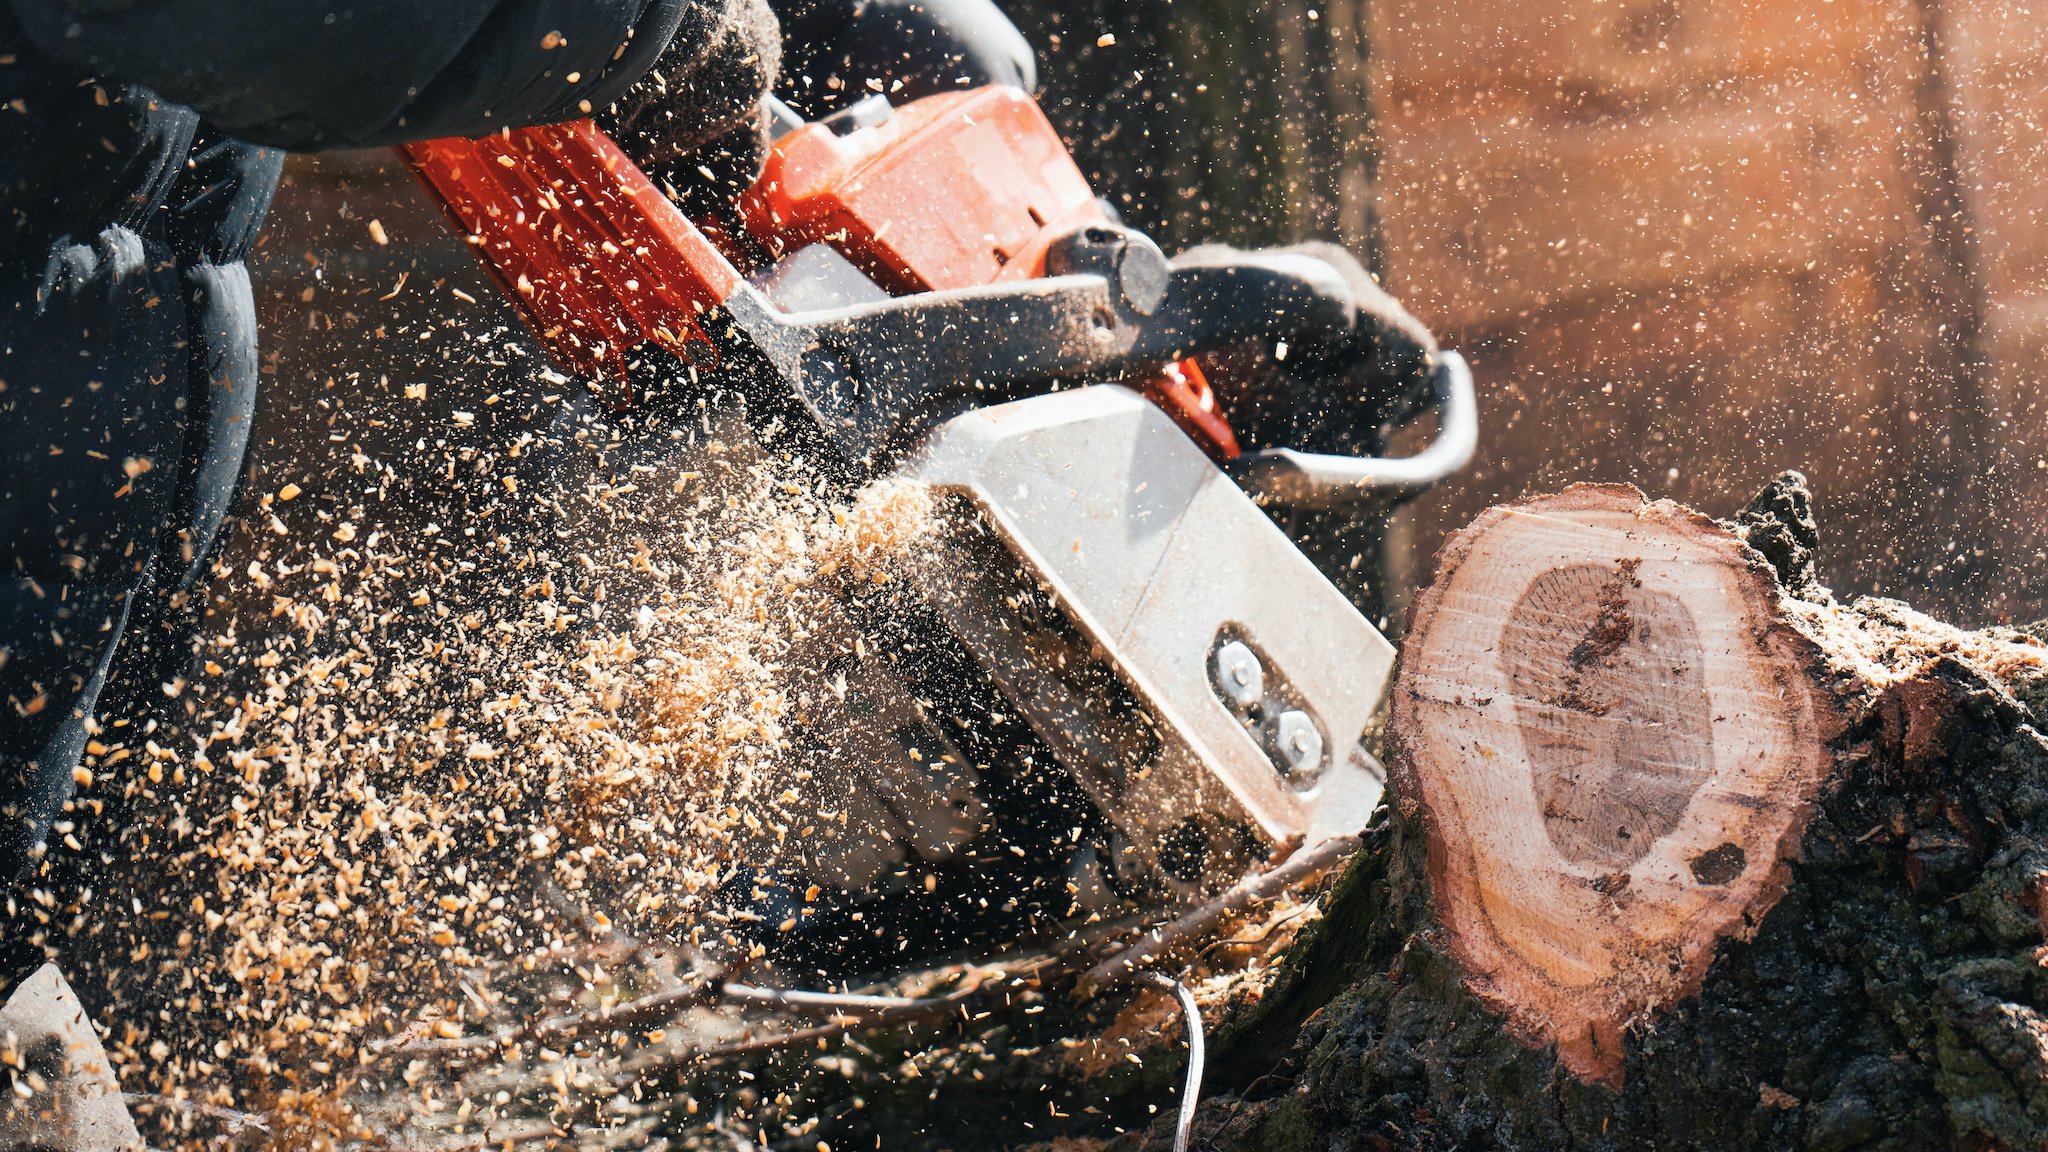 Close-up of a man sawing a tree with a chainsaw with flying sawdust